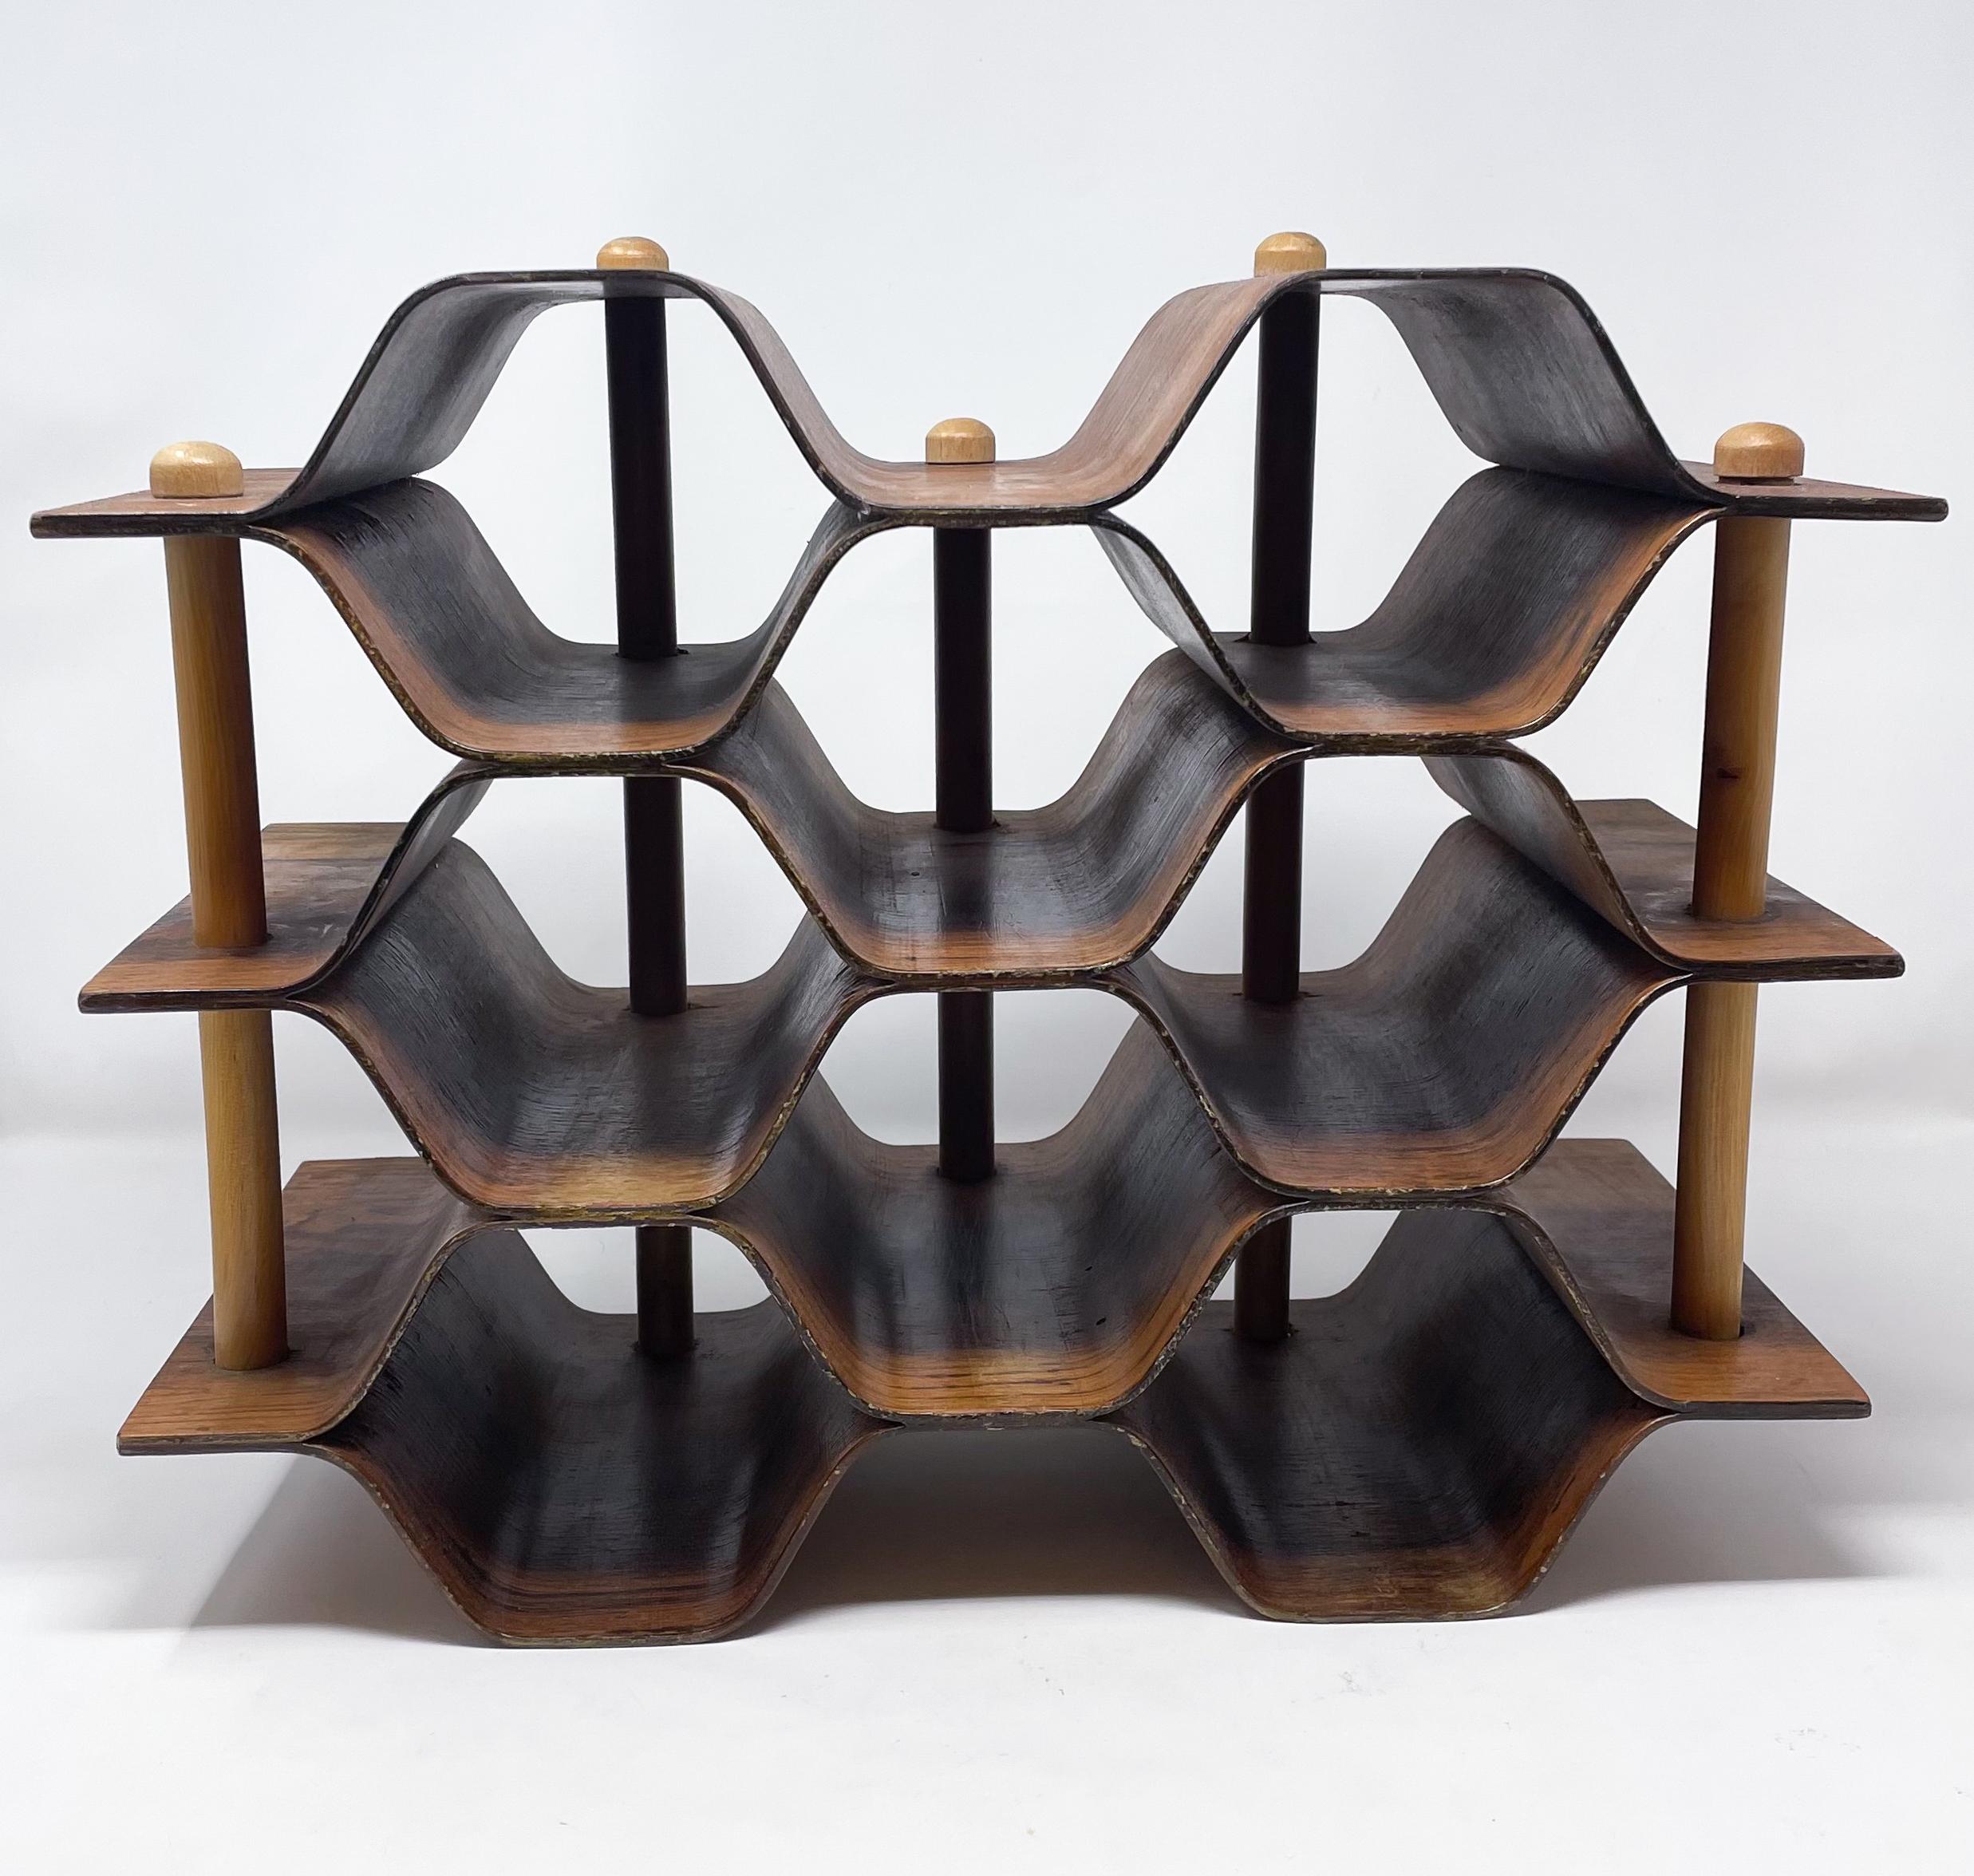 Mid-20th Century Torsten Johansson Wine Rack / Bottle Stand Produced by AB Formträ, Sweden, 1950s For Sale